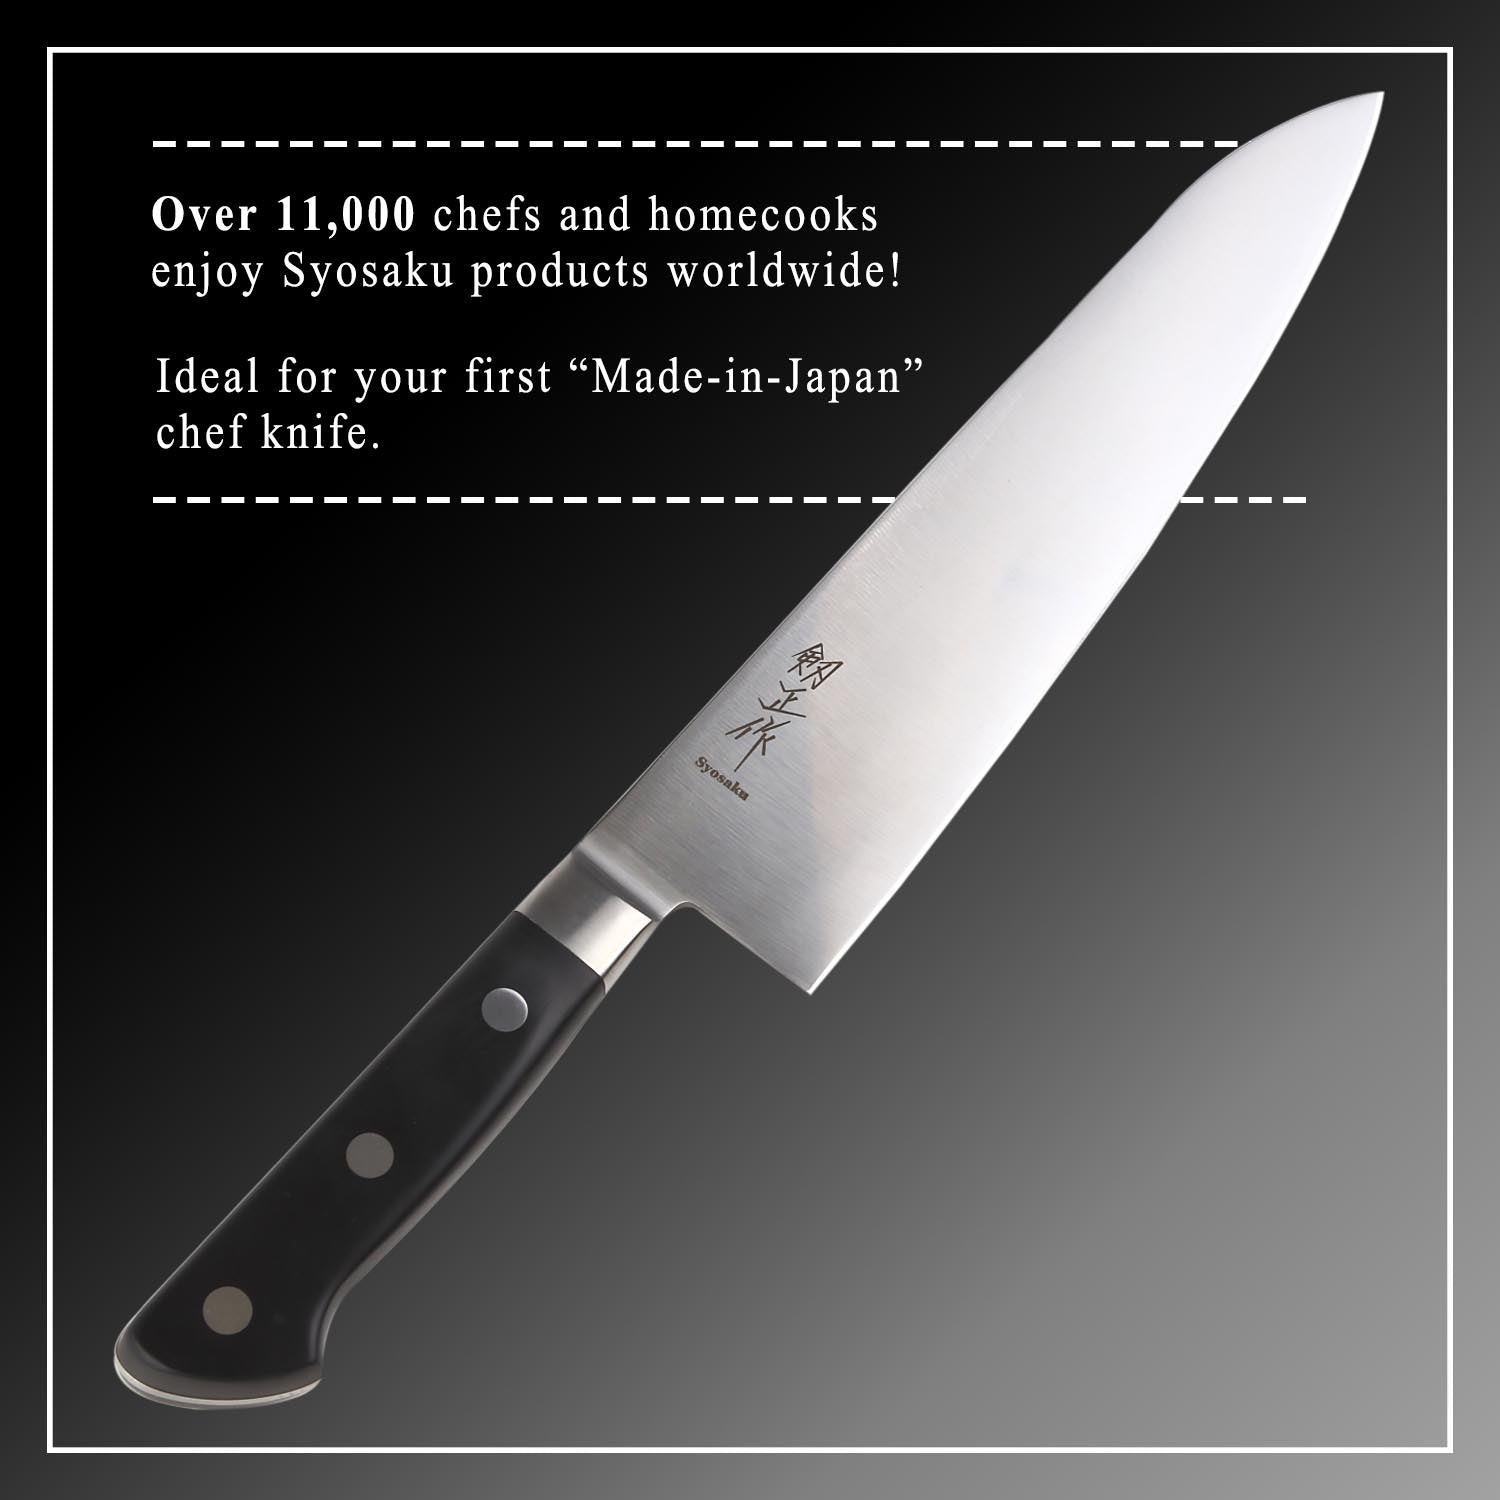 chef knife 8 Inch - kitchen knife European steel - best chef knife for High  Carbon Stainless Steel - Chopping knives for Budding Kitchen, cooking